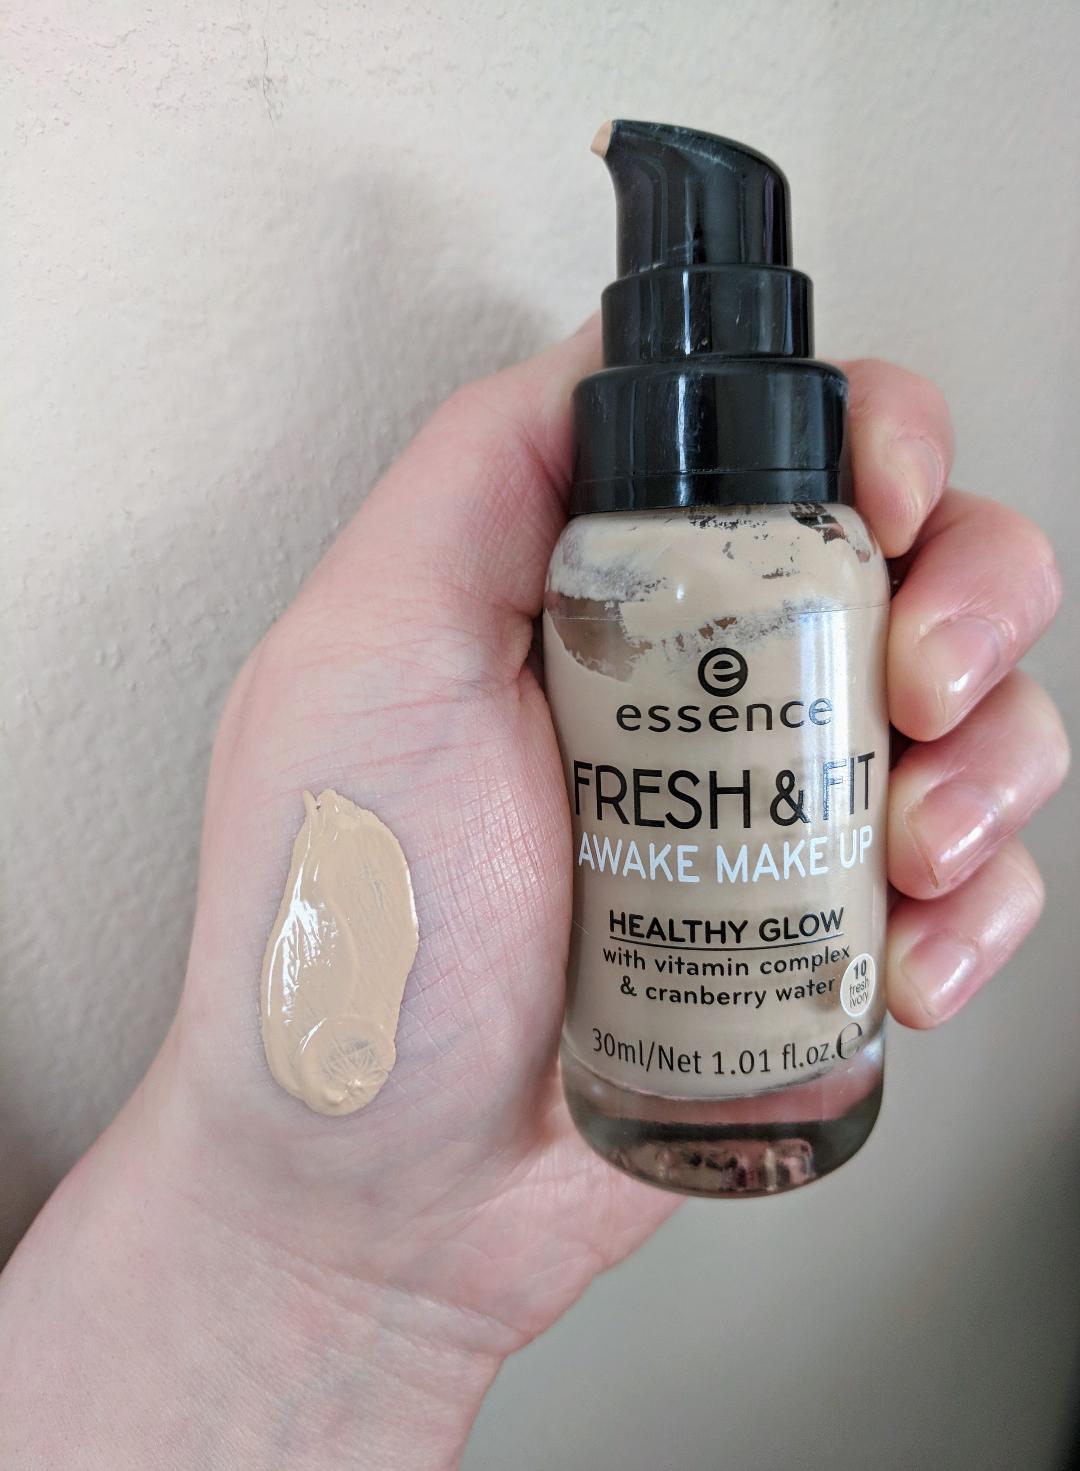 Disappointing New Products from The Beauty essence: and Powder Book and Fit Up! & Foundation Fresh Banana Brighten – Blog